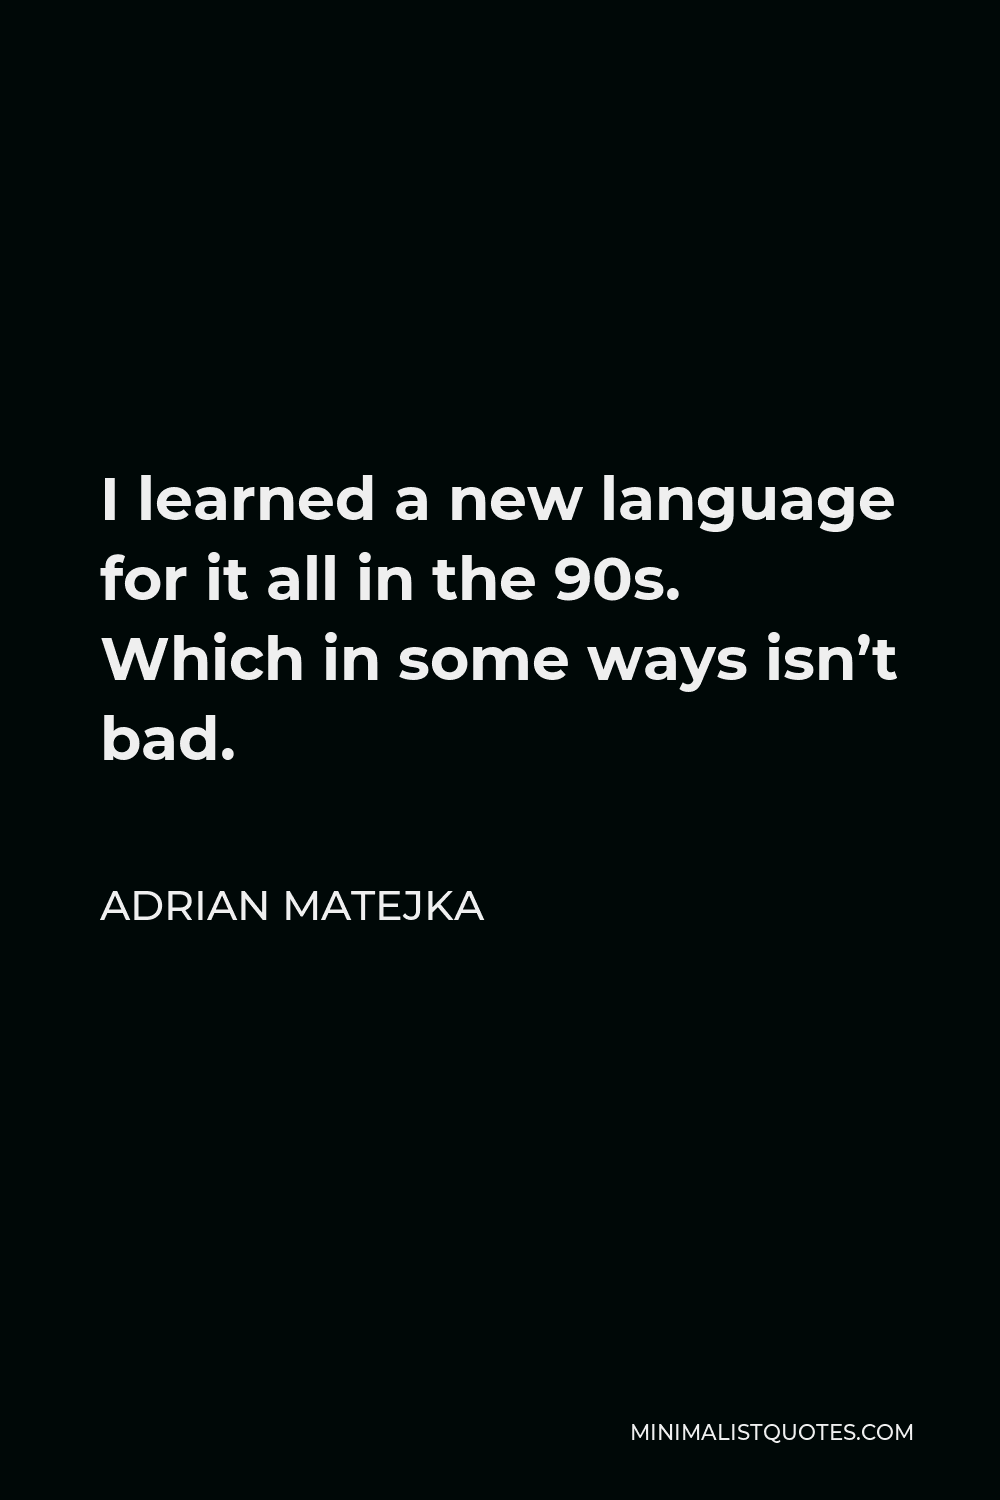 Adrian Matejka Quote - I learned a new language for it all in the 90s. Which in some ways isn’t bad.